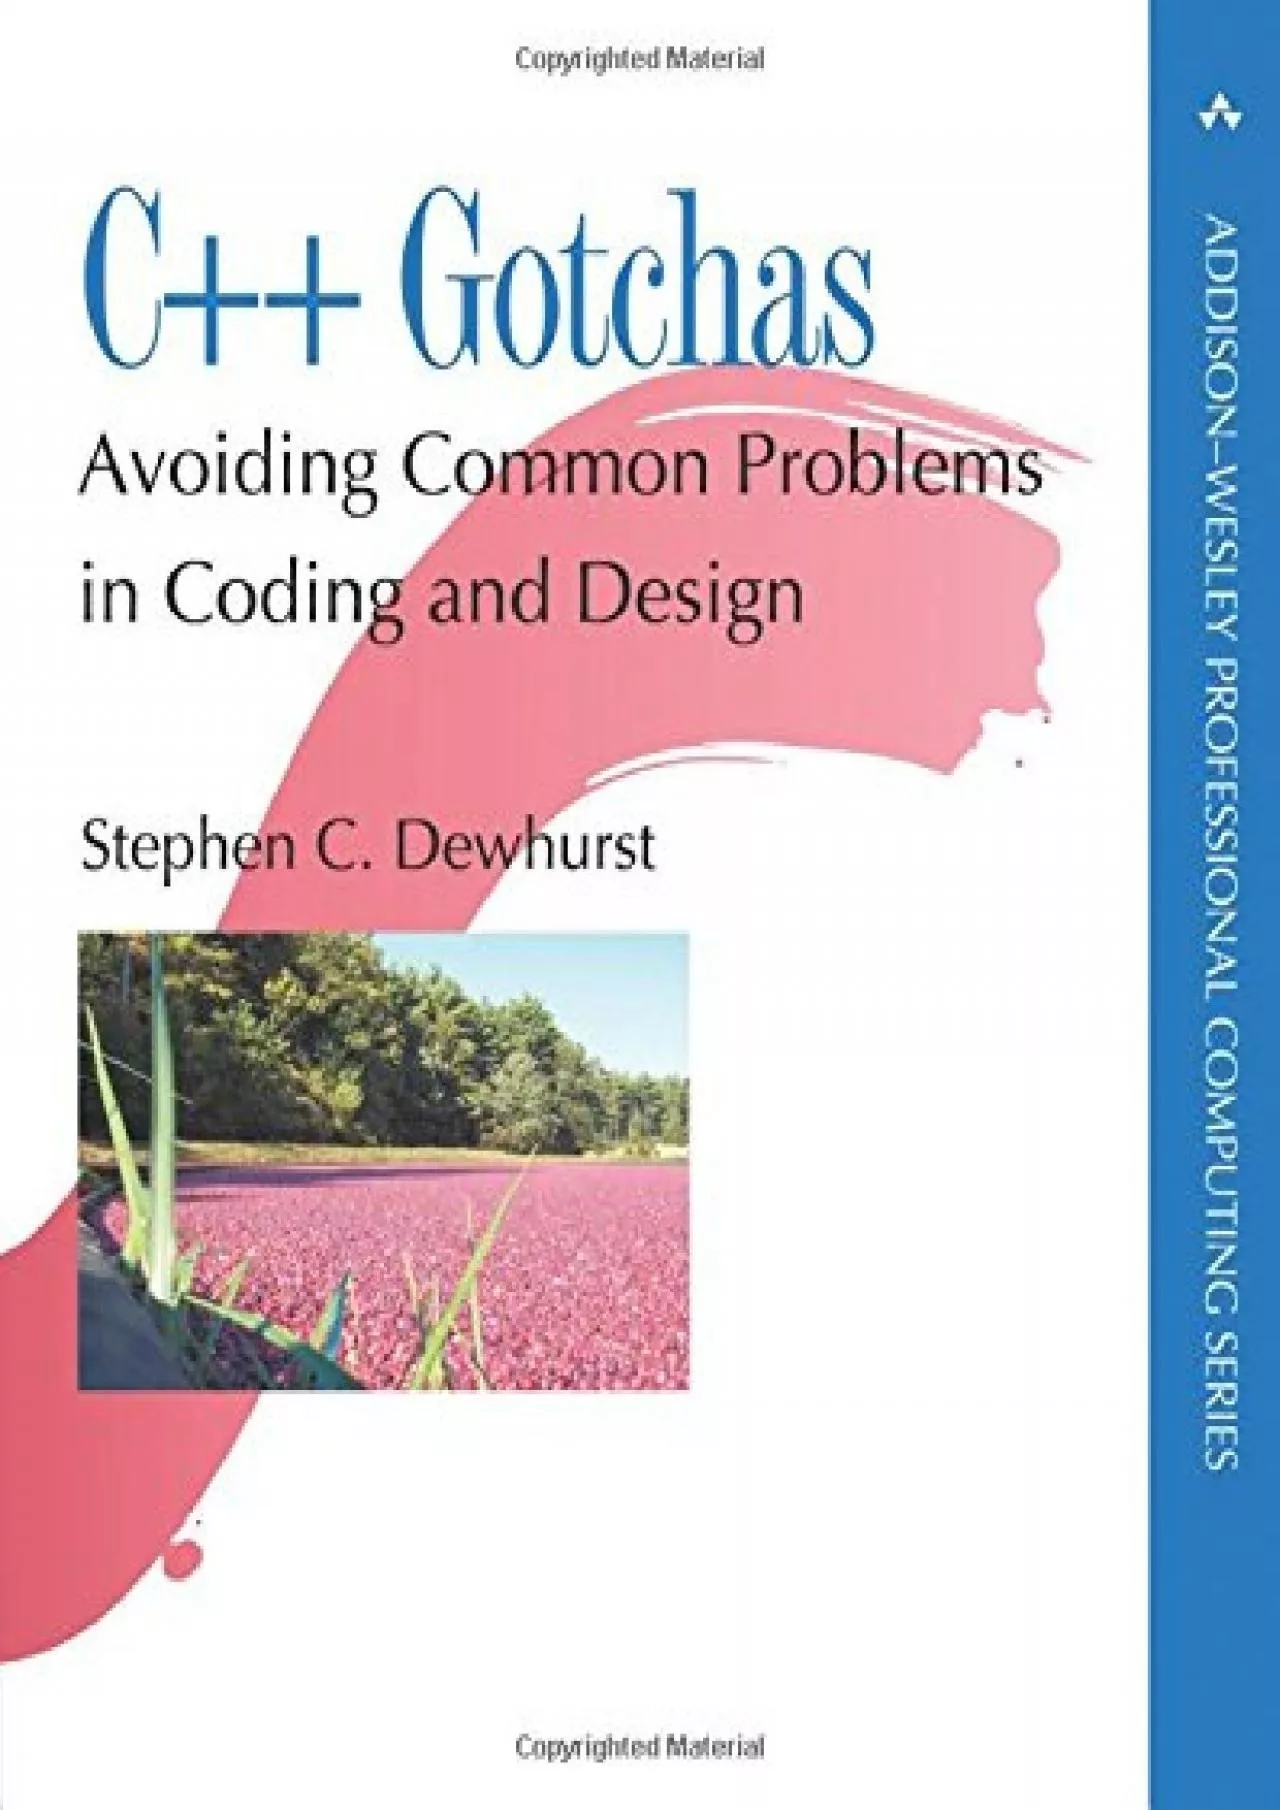 [READ]-C++ Gotchas: Avoiding Common Problems in Coding and Design